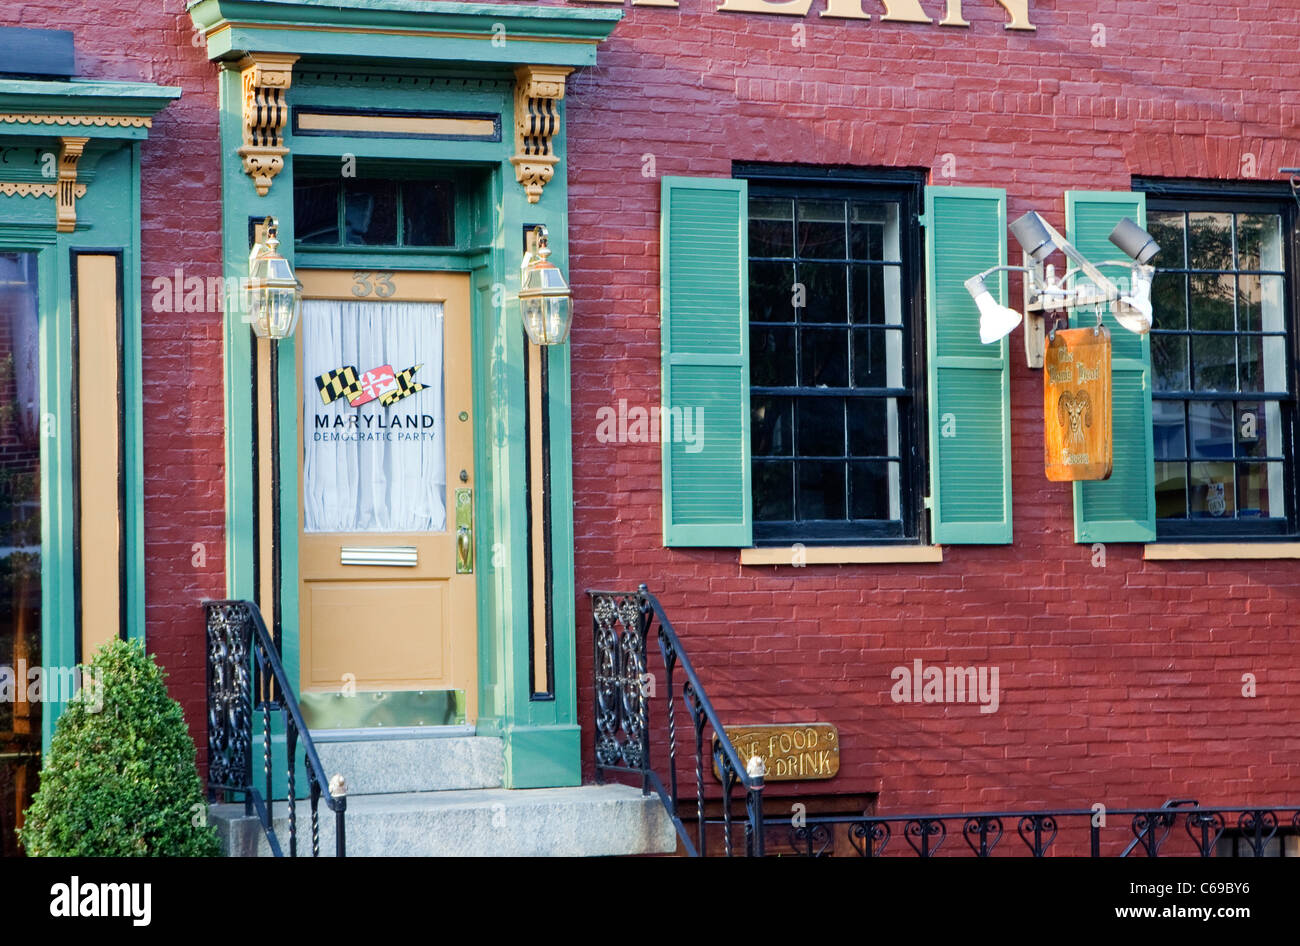 A view of the Democratic Party headquarters in Annapolis, Maryland Stock Photo